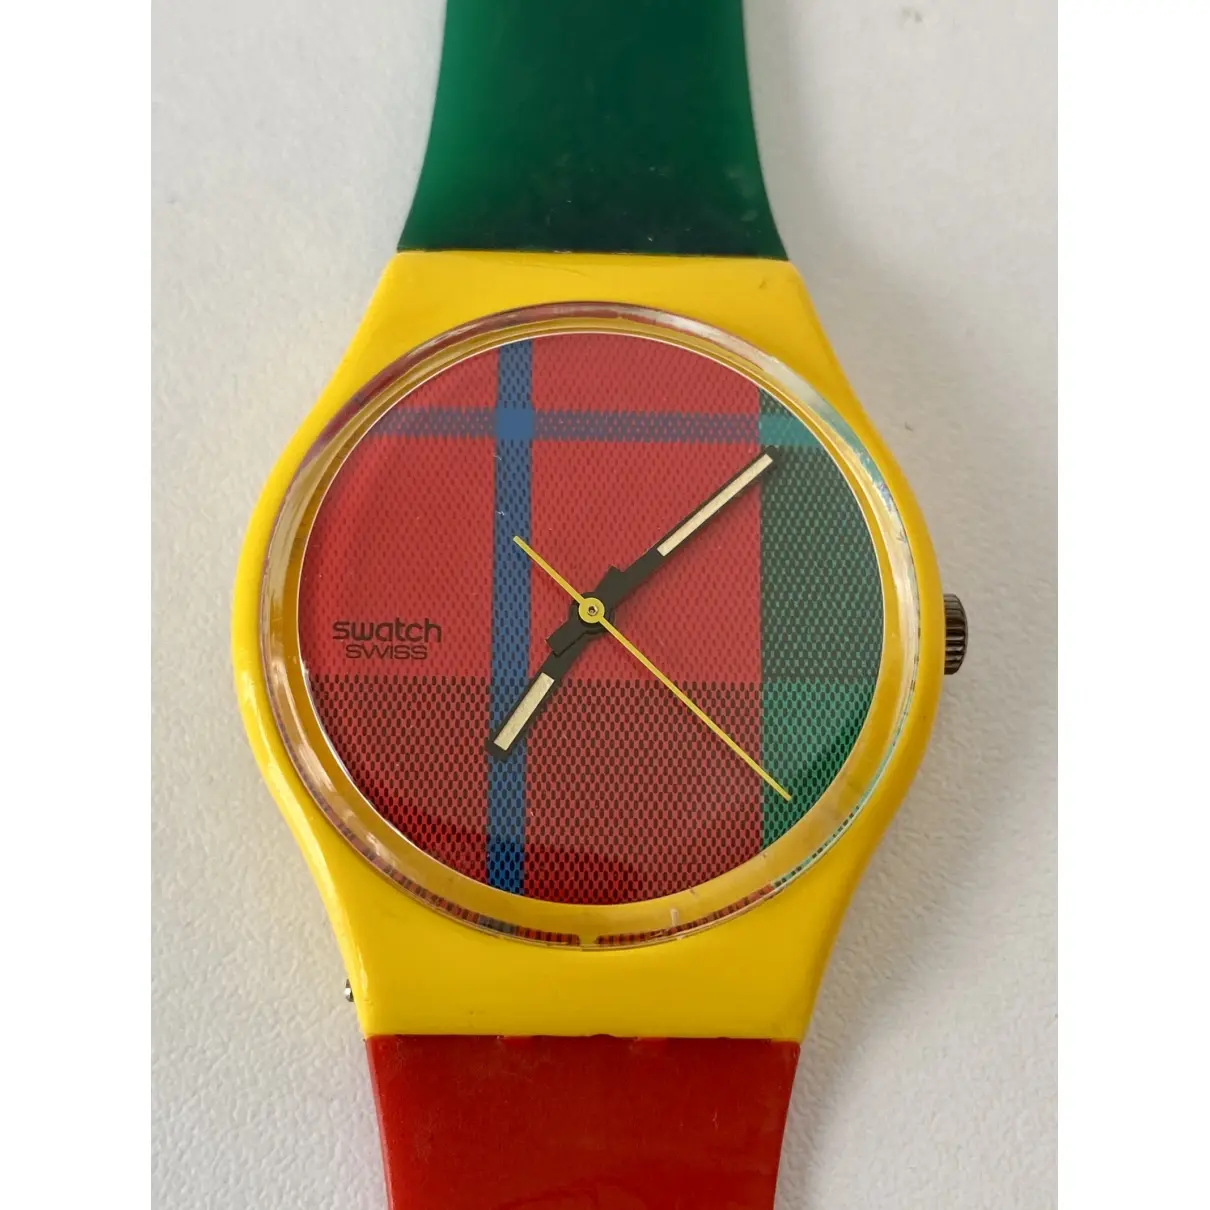 Swatch Watch for sale - Vintage